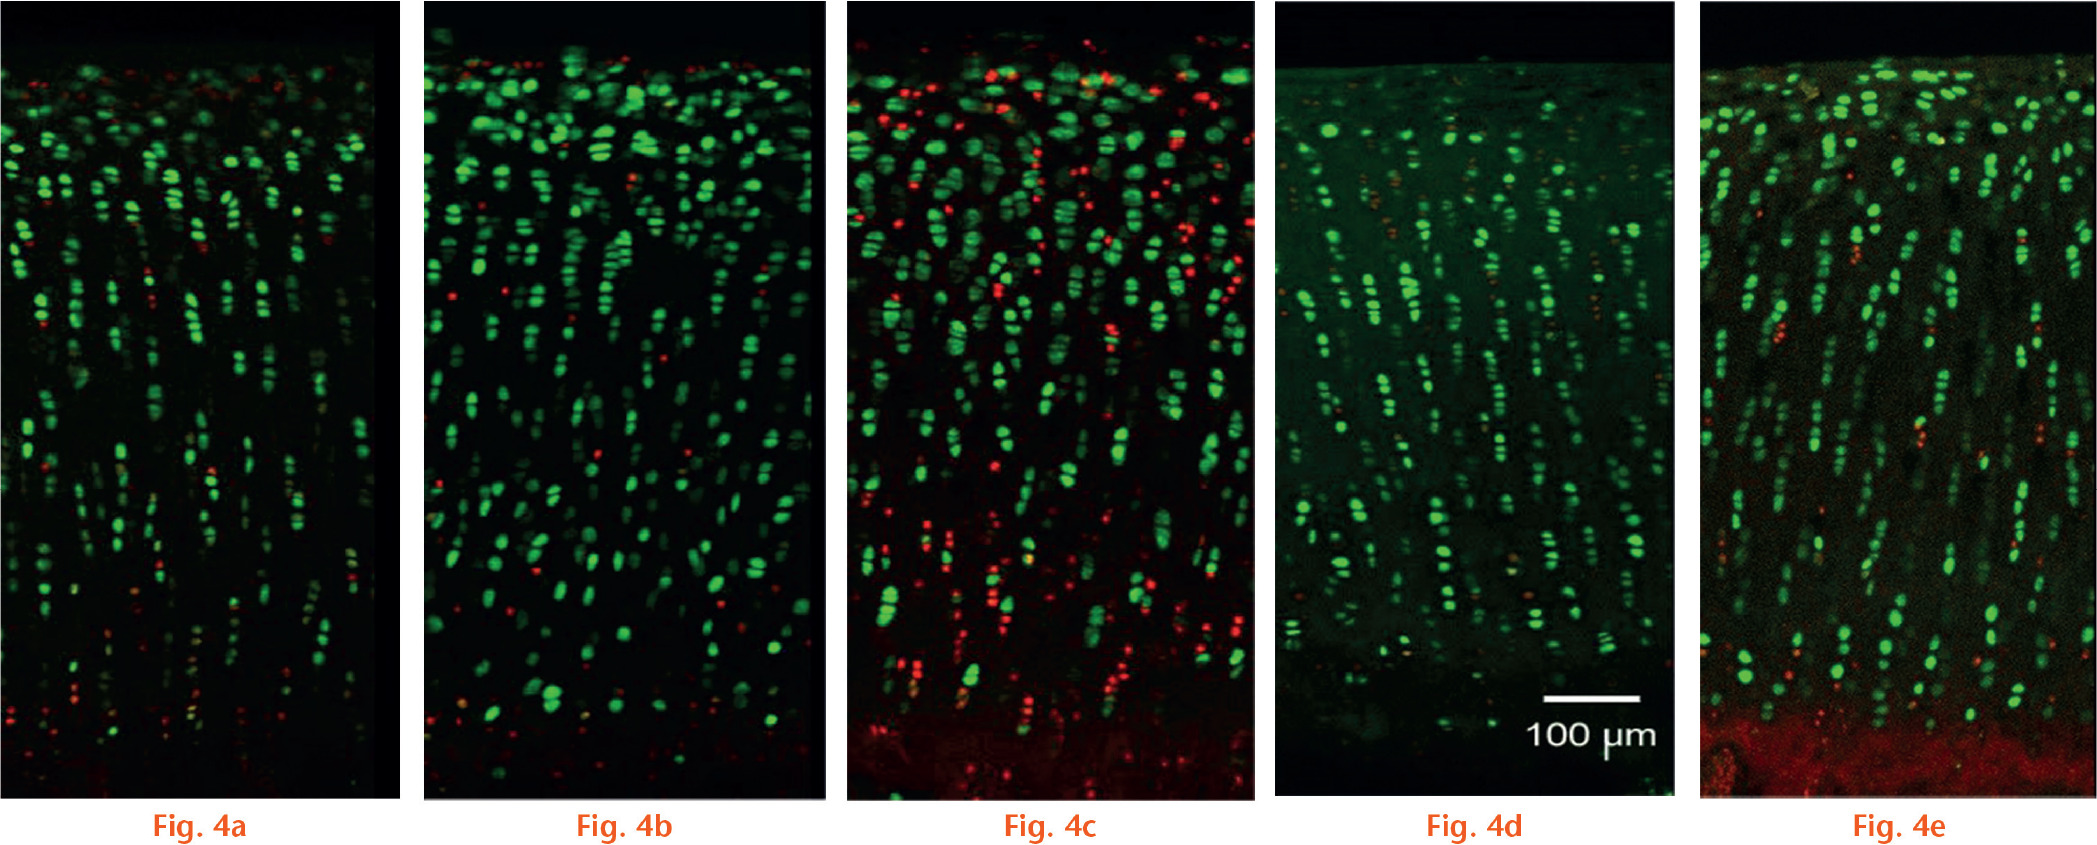  
            Image showing chondrocyte viability over time in the static and dynamic models. Under the confocal laser scanning microscope, images of the cartilage coronal section showed that the total cell population labelled with propidium iodide (PI) (in red) increased gradually from day 0 to day 28 in the static model (a to c), and most of the red cells were located in the superficial and deep quarter of the cartilage. In the dynamic model (d and e), only a few sporadically distributed PI-labelled chondrocytes were observed on day 28, and there were still live cells (in green) adjacent to the subchondral bone (a) day 0 control; b) day 14 static; c) day 28 static; d) day 14 dynamic; e) day 28 dynamic).
          